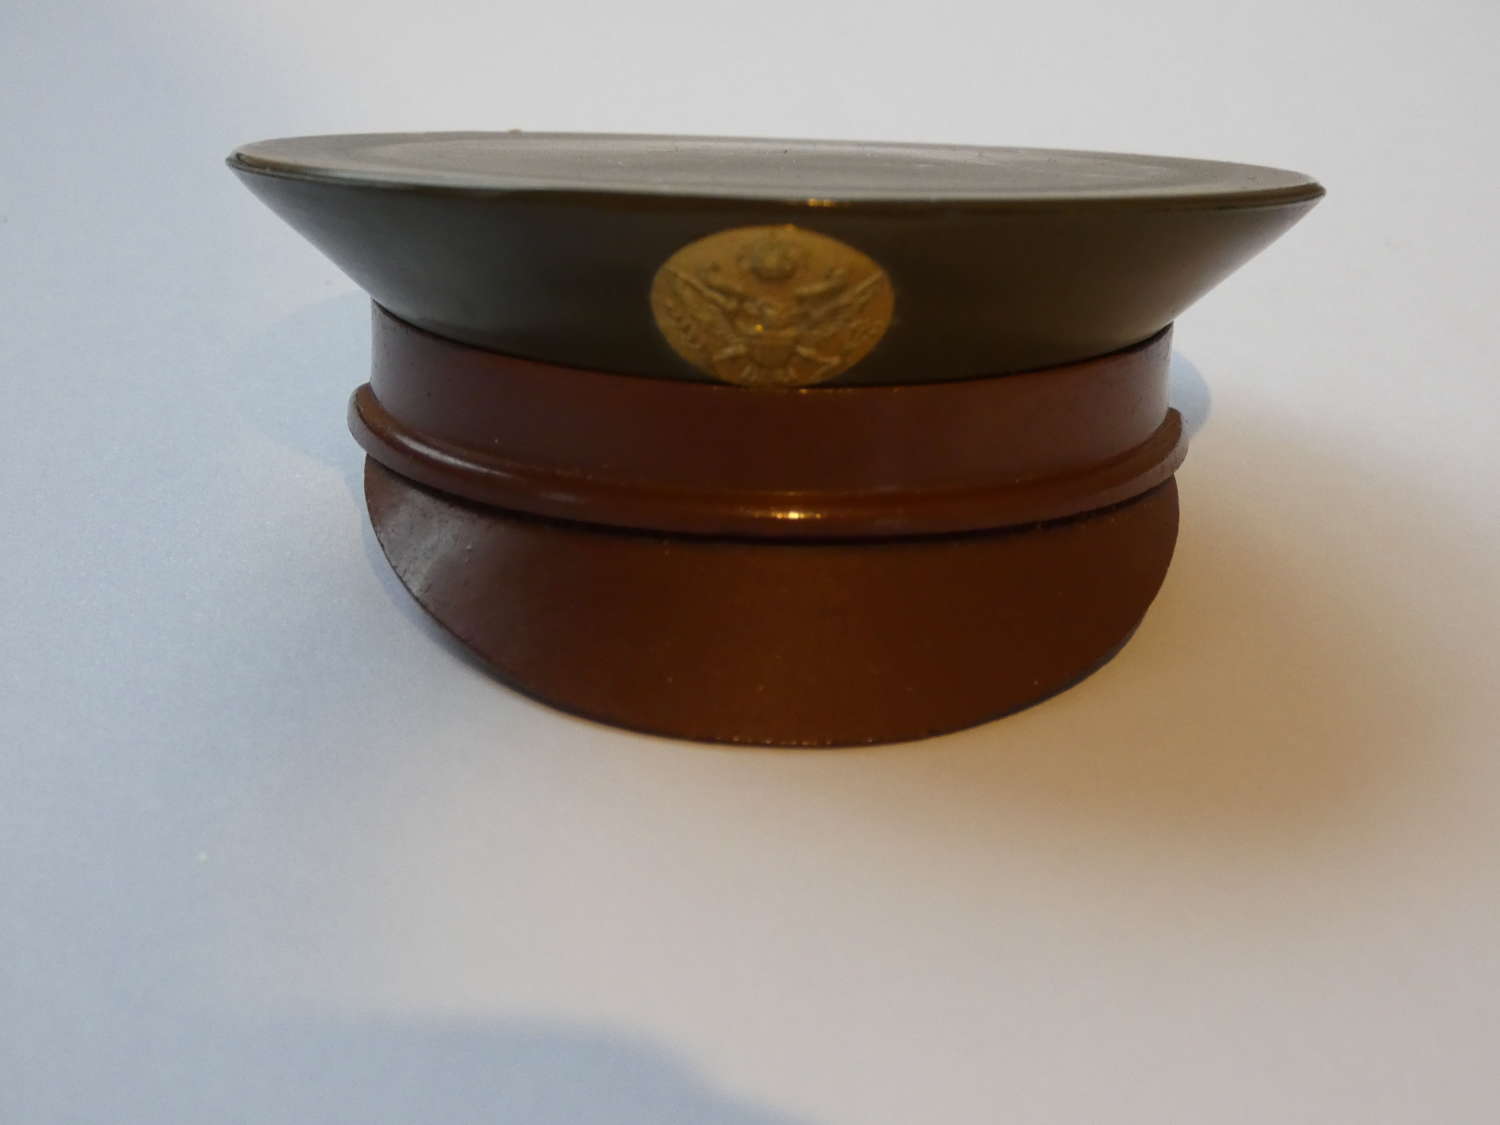 Army Officers Hat - A 1940s Loose Powder